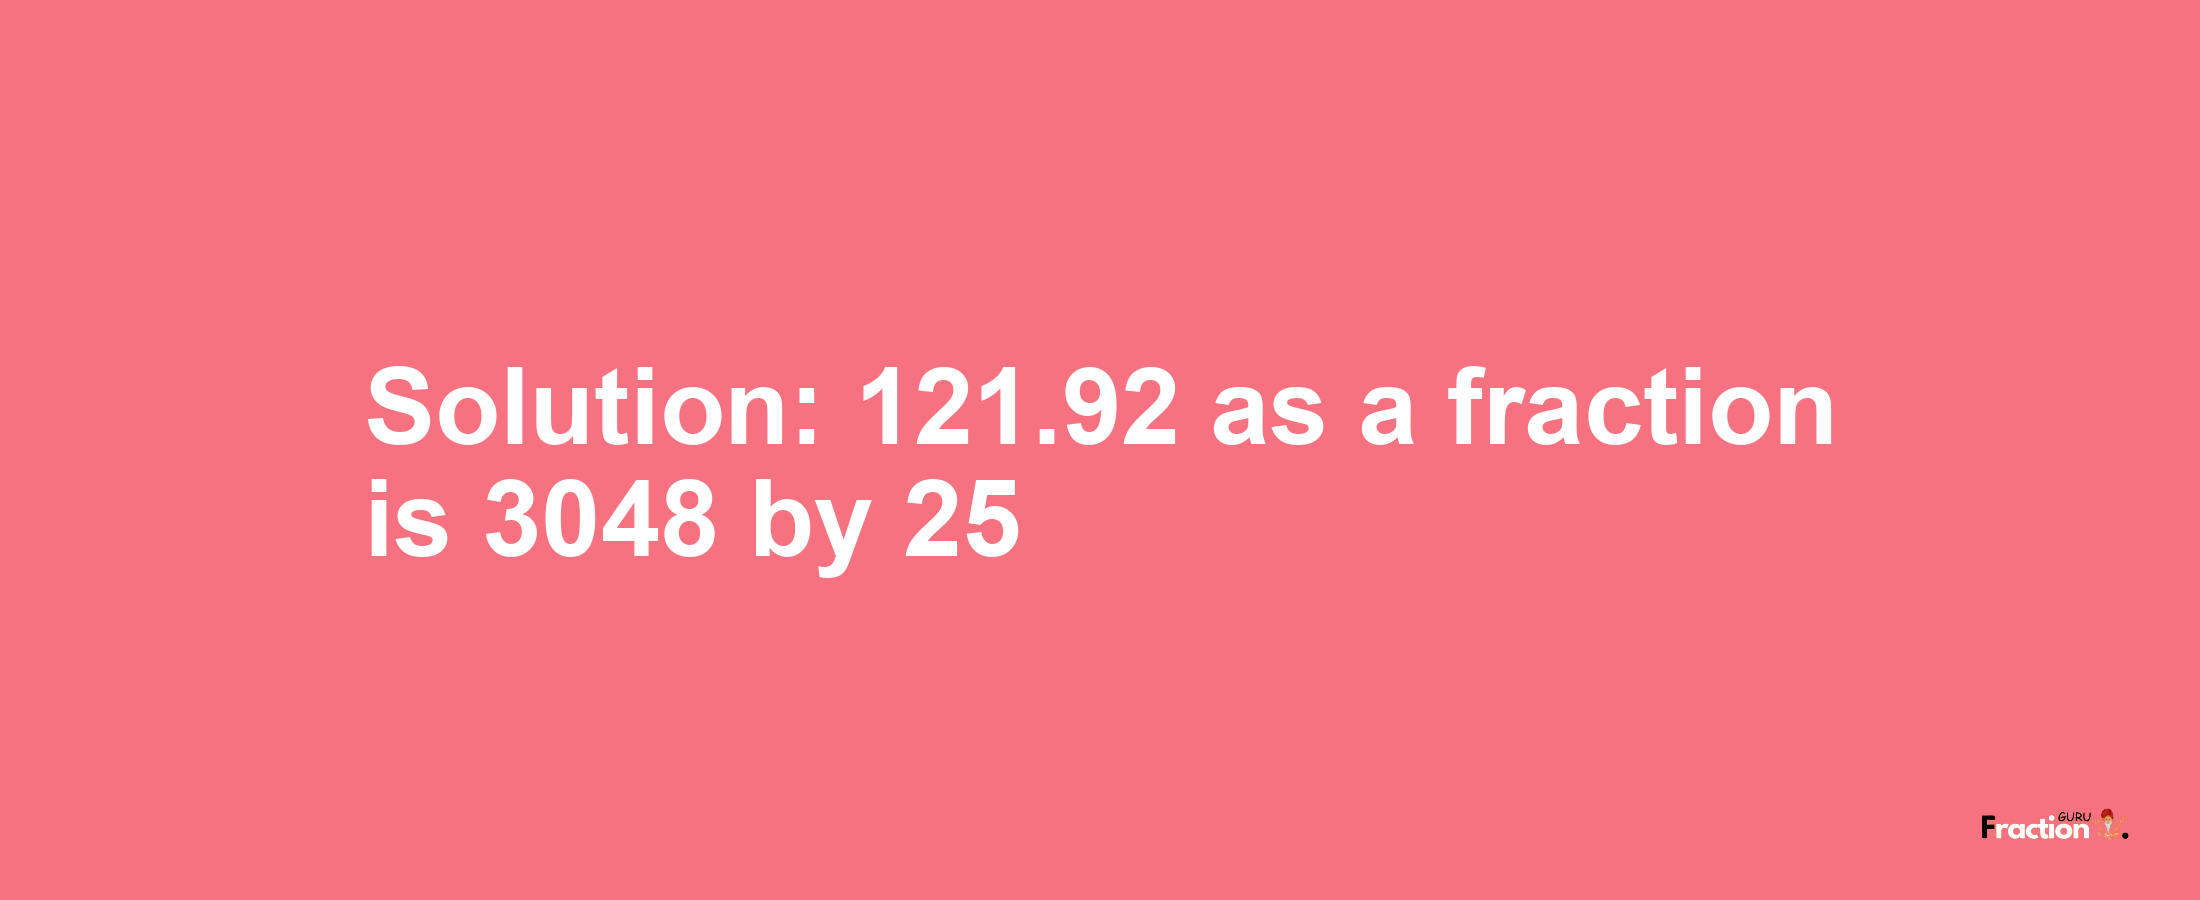 Solution:121.92 as a fraction is 3048/25